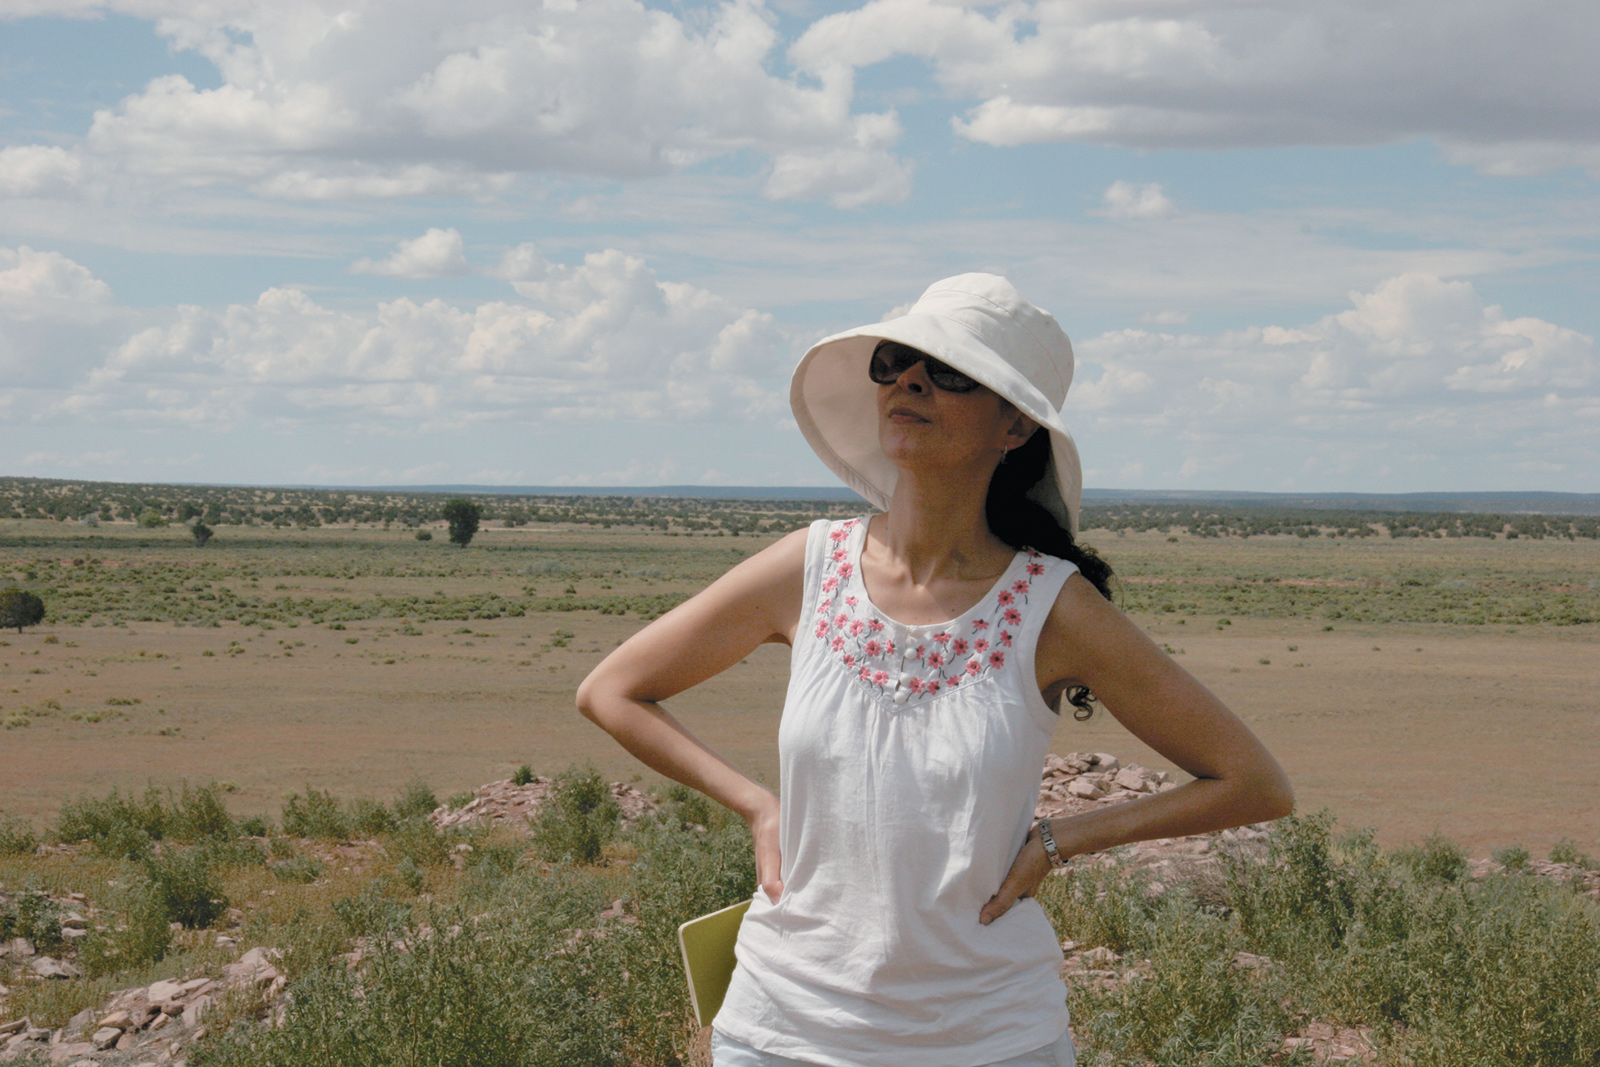 Laila Lalami at Zuni Pueblo, New Mexico, July 2010, during research for her novel The Moor’s Account